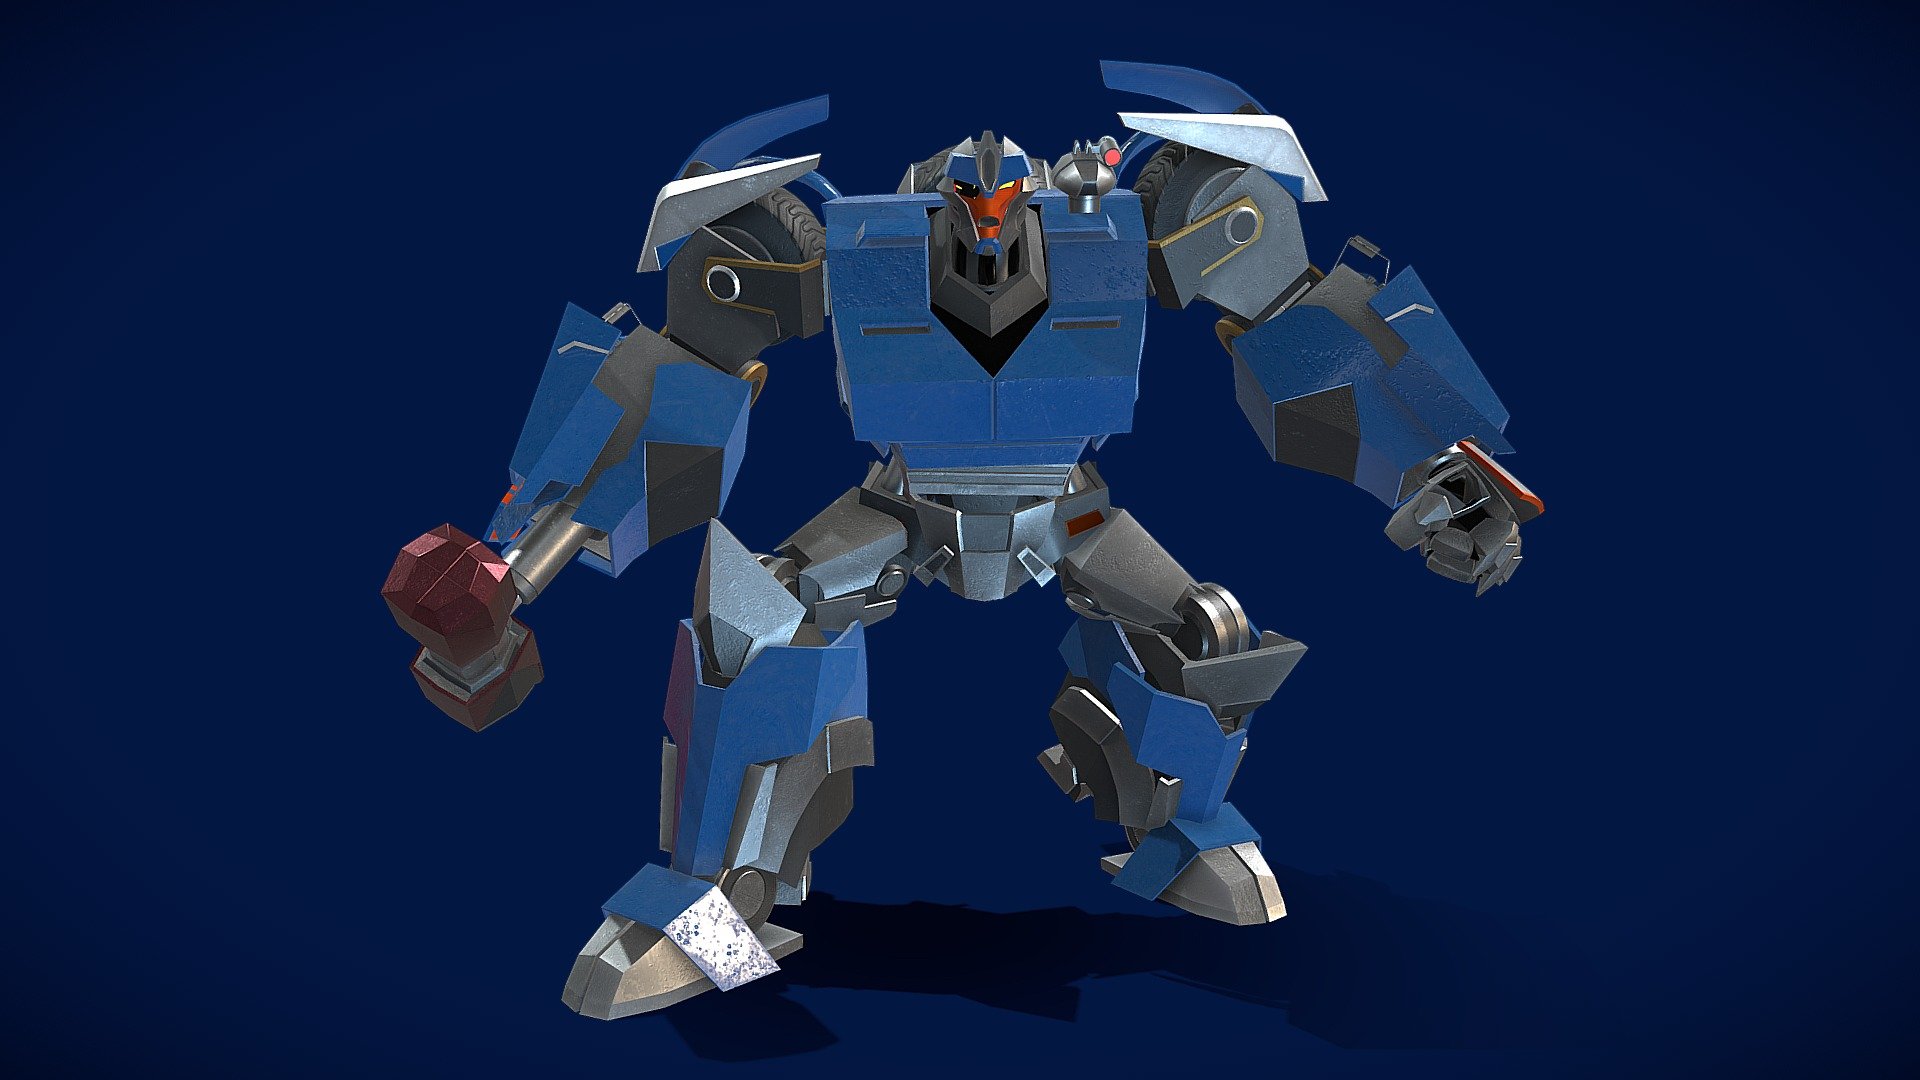 3D model rig of Breakdown, a Decepticon from the Transformers Prime series. With rigging and PBR materials, ensuring appropriate usability for animations and games.

The native file type is BLEND as it was created with Blender, however with OBJ, FBX as well as PBR textures provided, it will work with any 3D programs.

All rights of the Transformers brand belongs to Hasbro.

&mdash;NOTES&mdash;
For a more in depth look of the purchasable package, check out the portfolio post: https://www.artstation.com/artwork/aYLJk2

&mdash;DETAILS&mdash;

In this package includes:





Blender file (.BLEND) with armature rigging, proper materials and PBR textures set up.




PBR textures in 4K, including these maps: Color, Metallic, Specular, Roughness, Emission.




OBJ and FBX files.



The model in Blender project file also completed with Crease edges and therefor, subdivision ready.

Thank you for your support of my products and look out for more soon 3d model